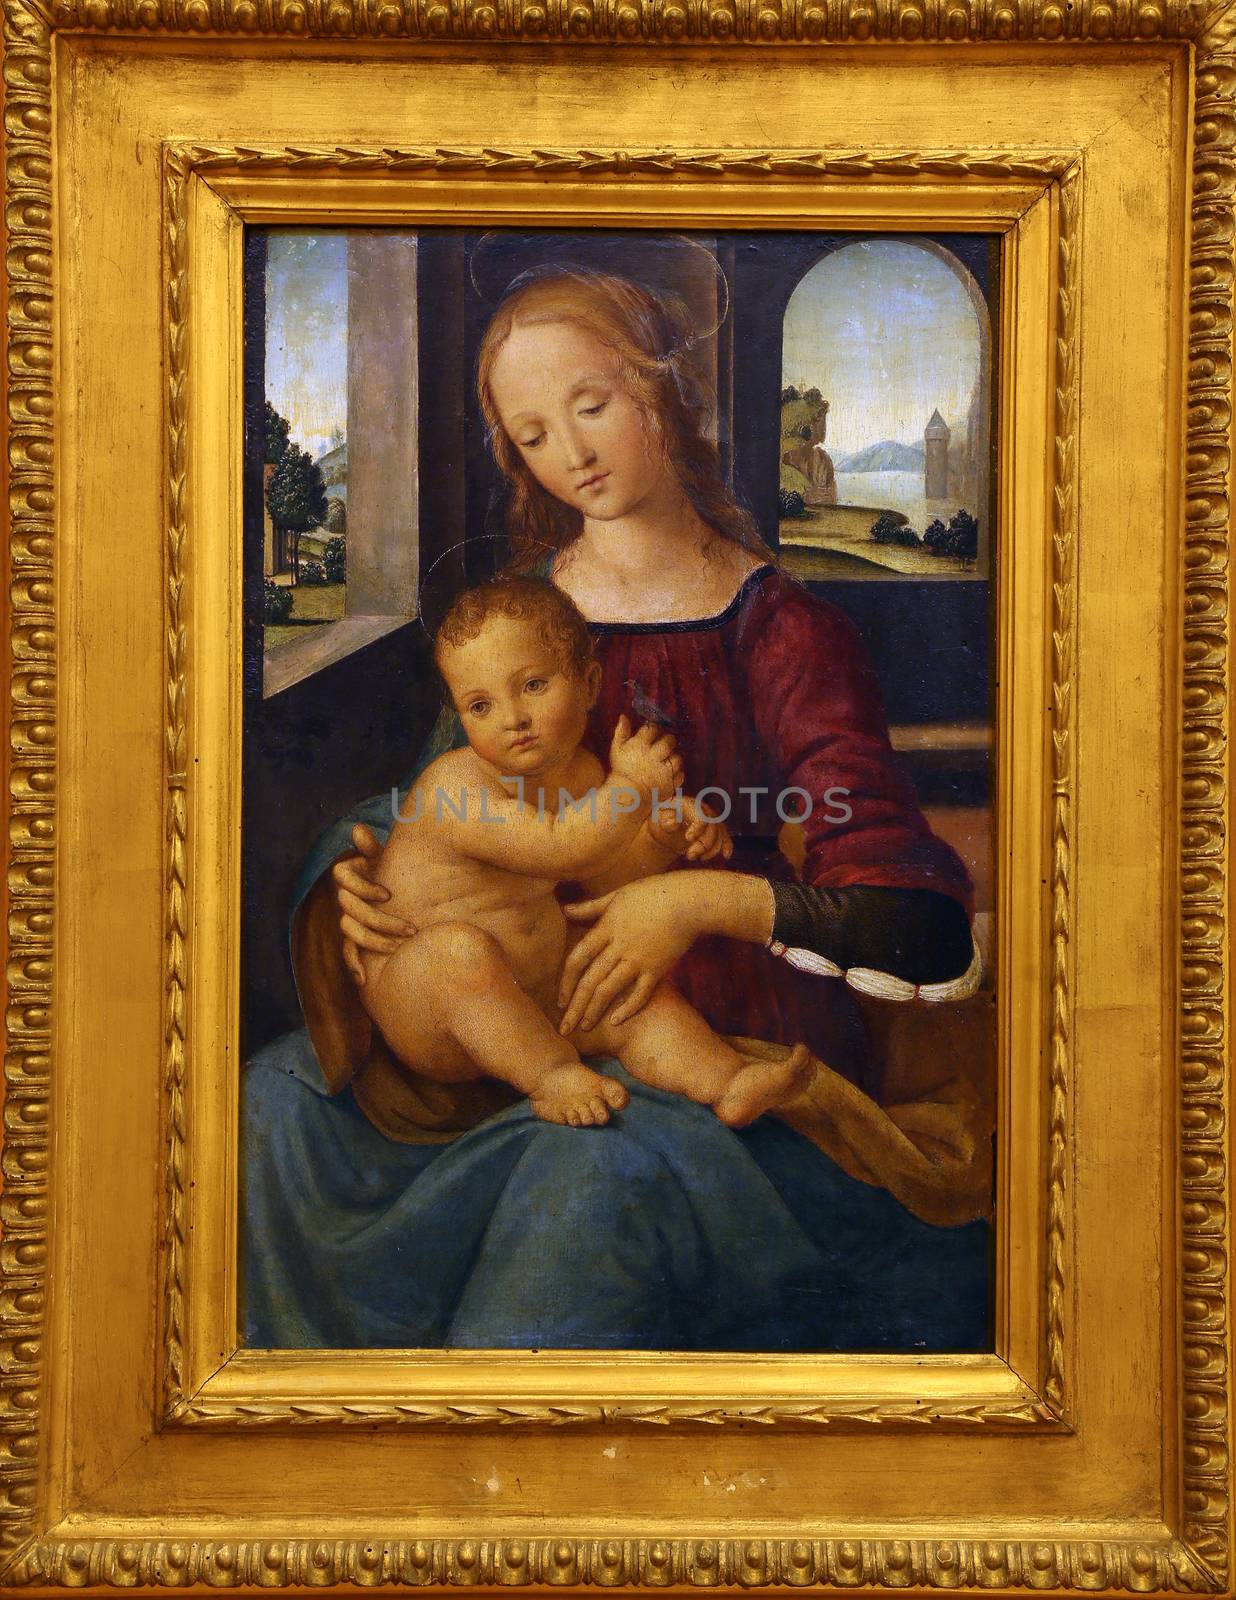 School of Lorenzo di Credi: Madonna with the Child, Old Masters Collection, Croatian Academy of Sciences in Zagreb, Croatia